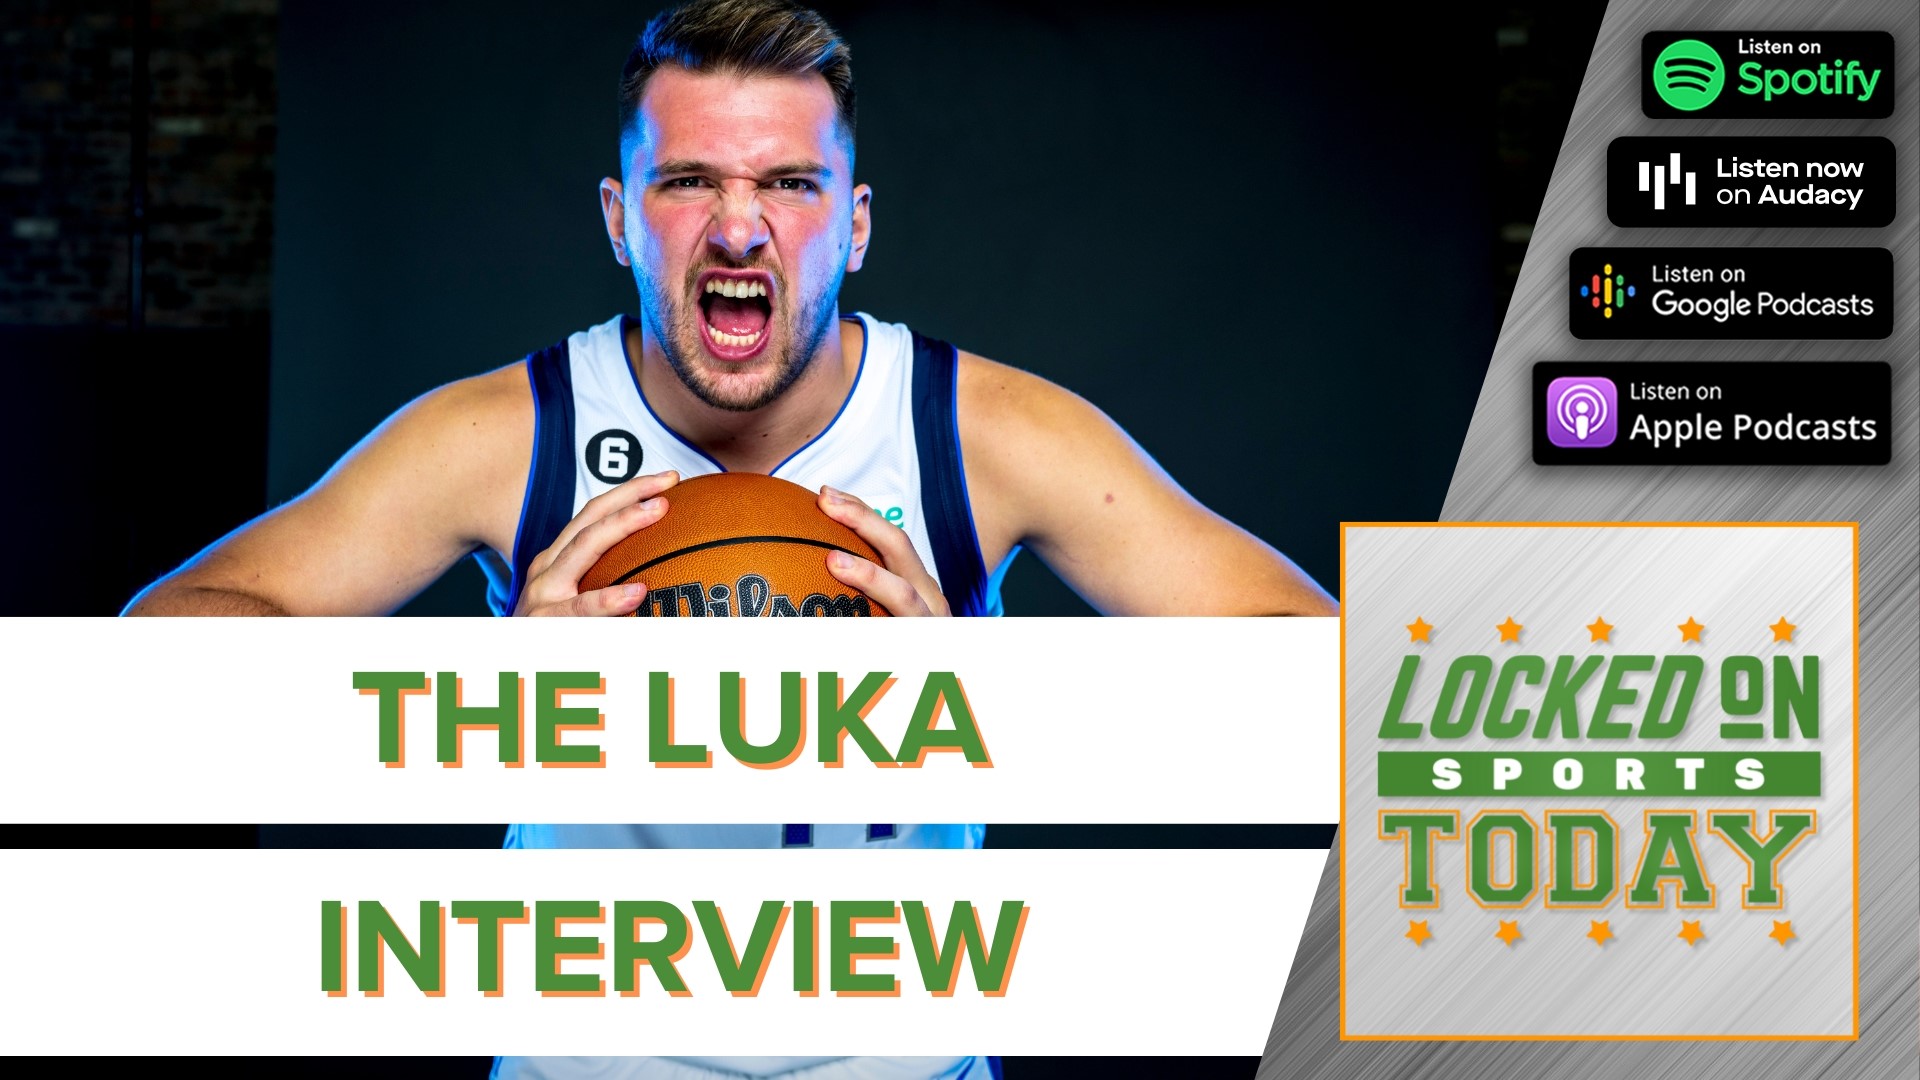 Discussing and debating the day's top stories from who is the best NFL team in the AFC to Luka's goals for the Dallas Mavericks this NBA season.